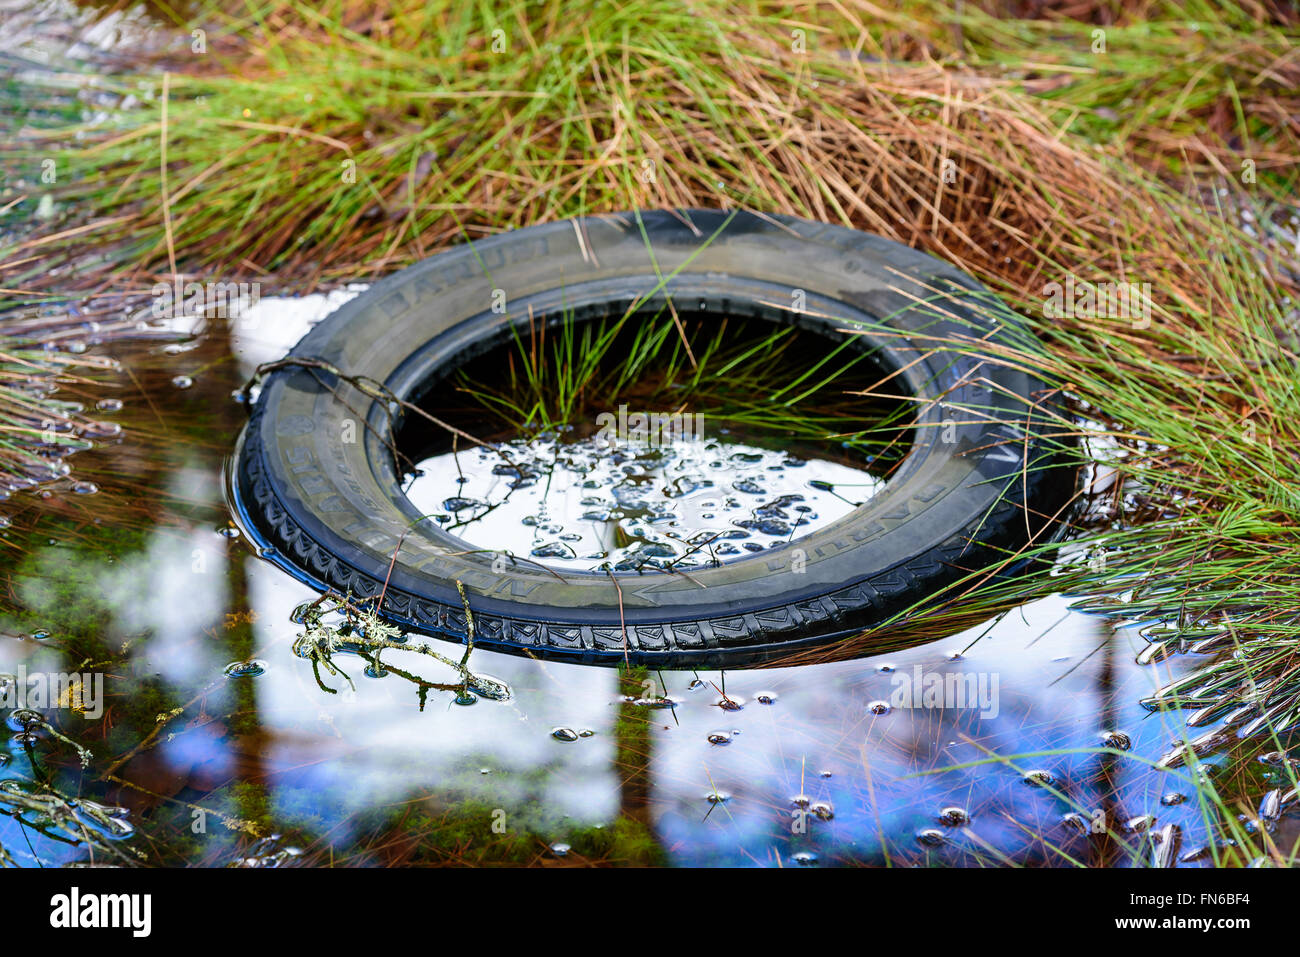 Ryd, Sweden - March 09, 2016: An old used car tire left in nature in a water puddle. It is slowly degrading and polluting the na Stock Photo